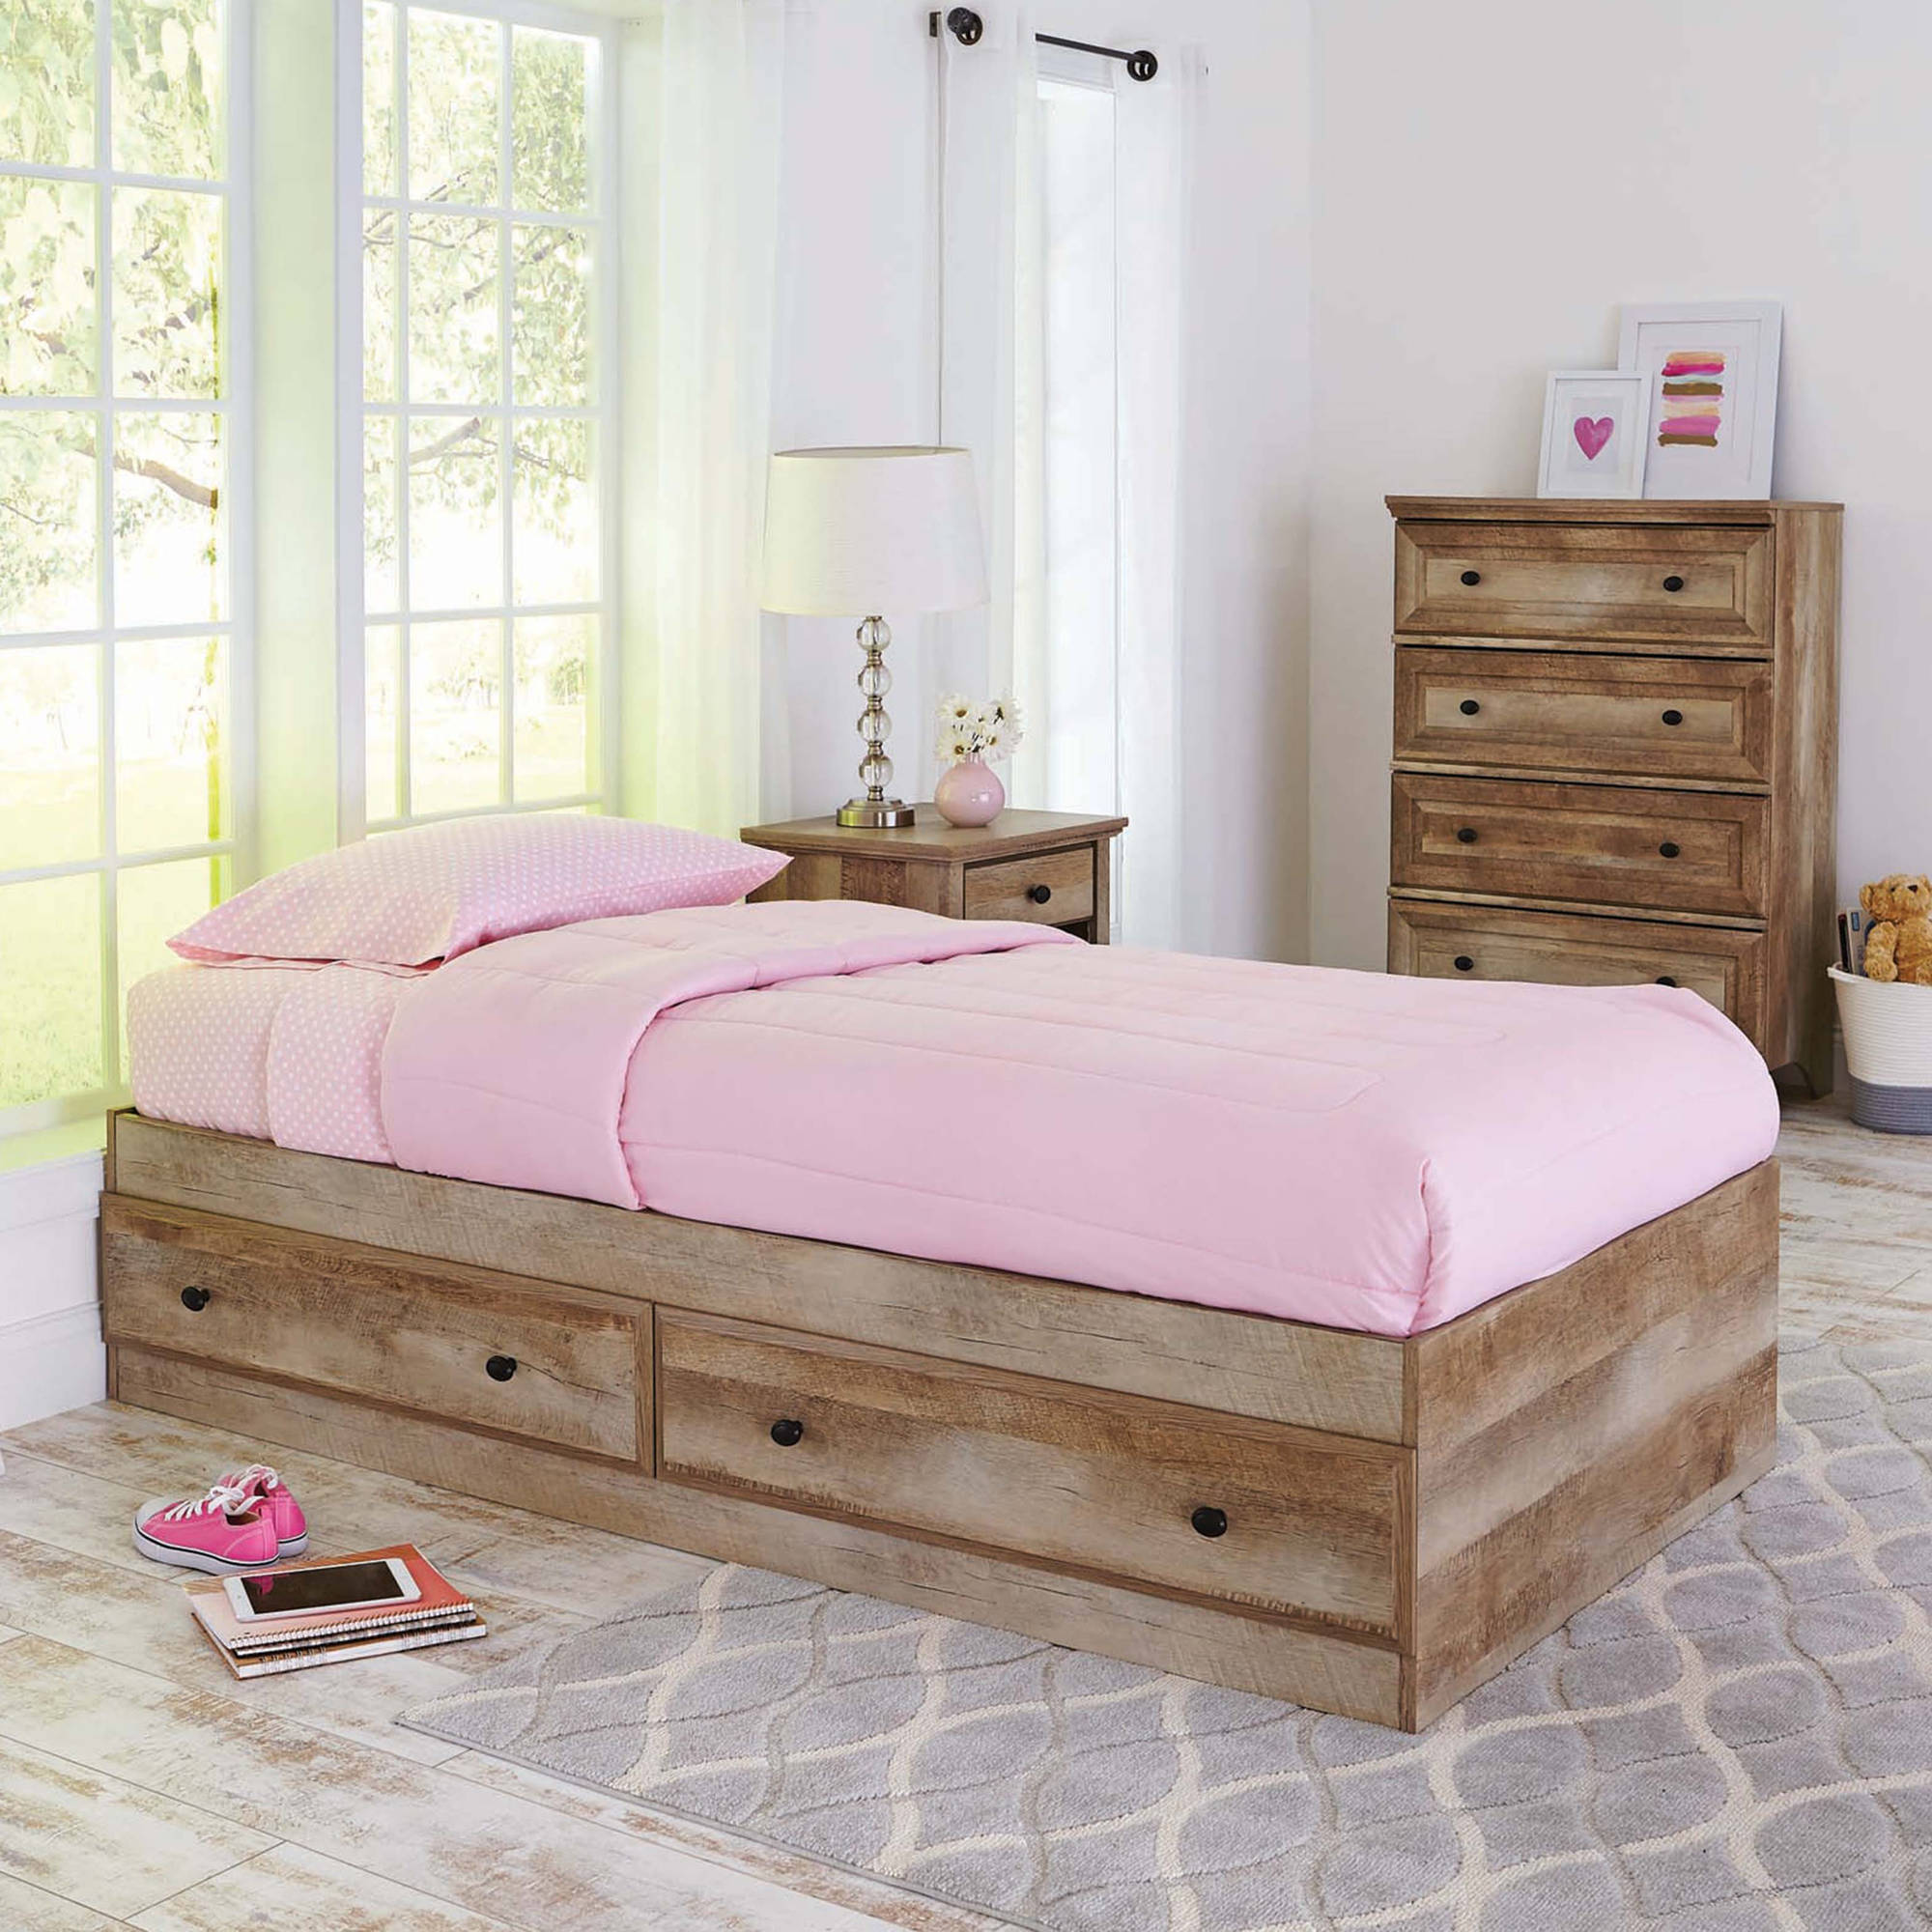 Better Homes and Gardens Crossmill Mates Twin Bed, Weathered Finish